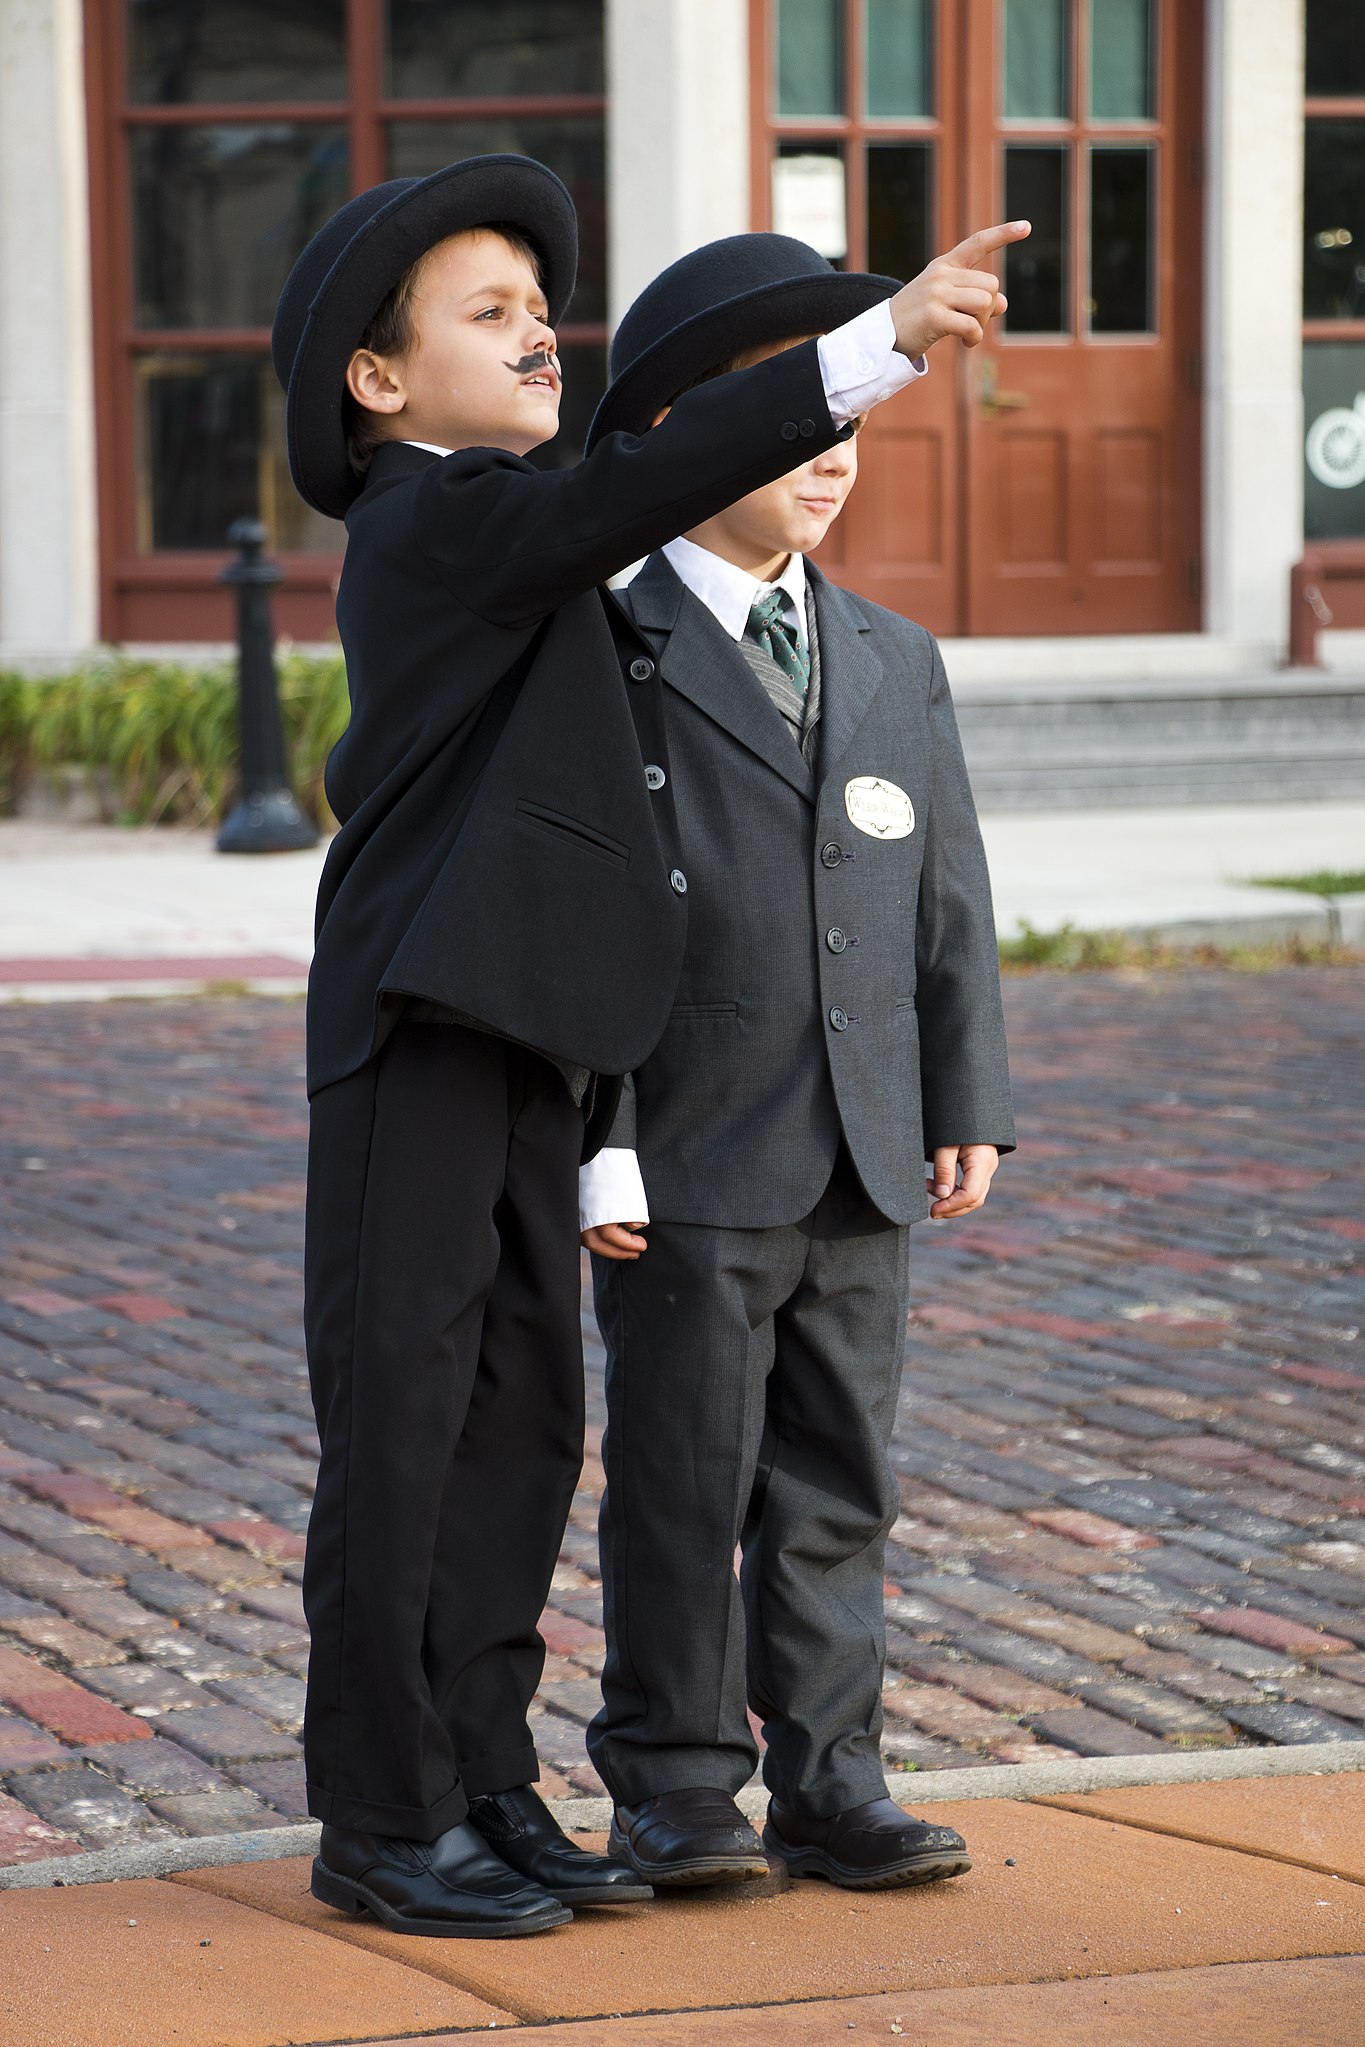 Two kids wearing 19th-century style suits. One of them is pointing toward the horizon.